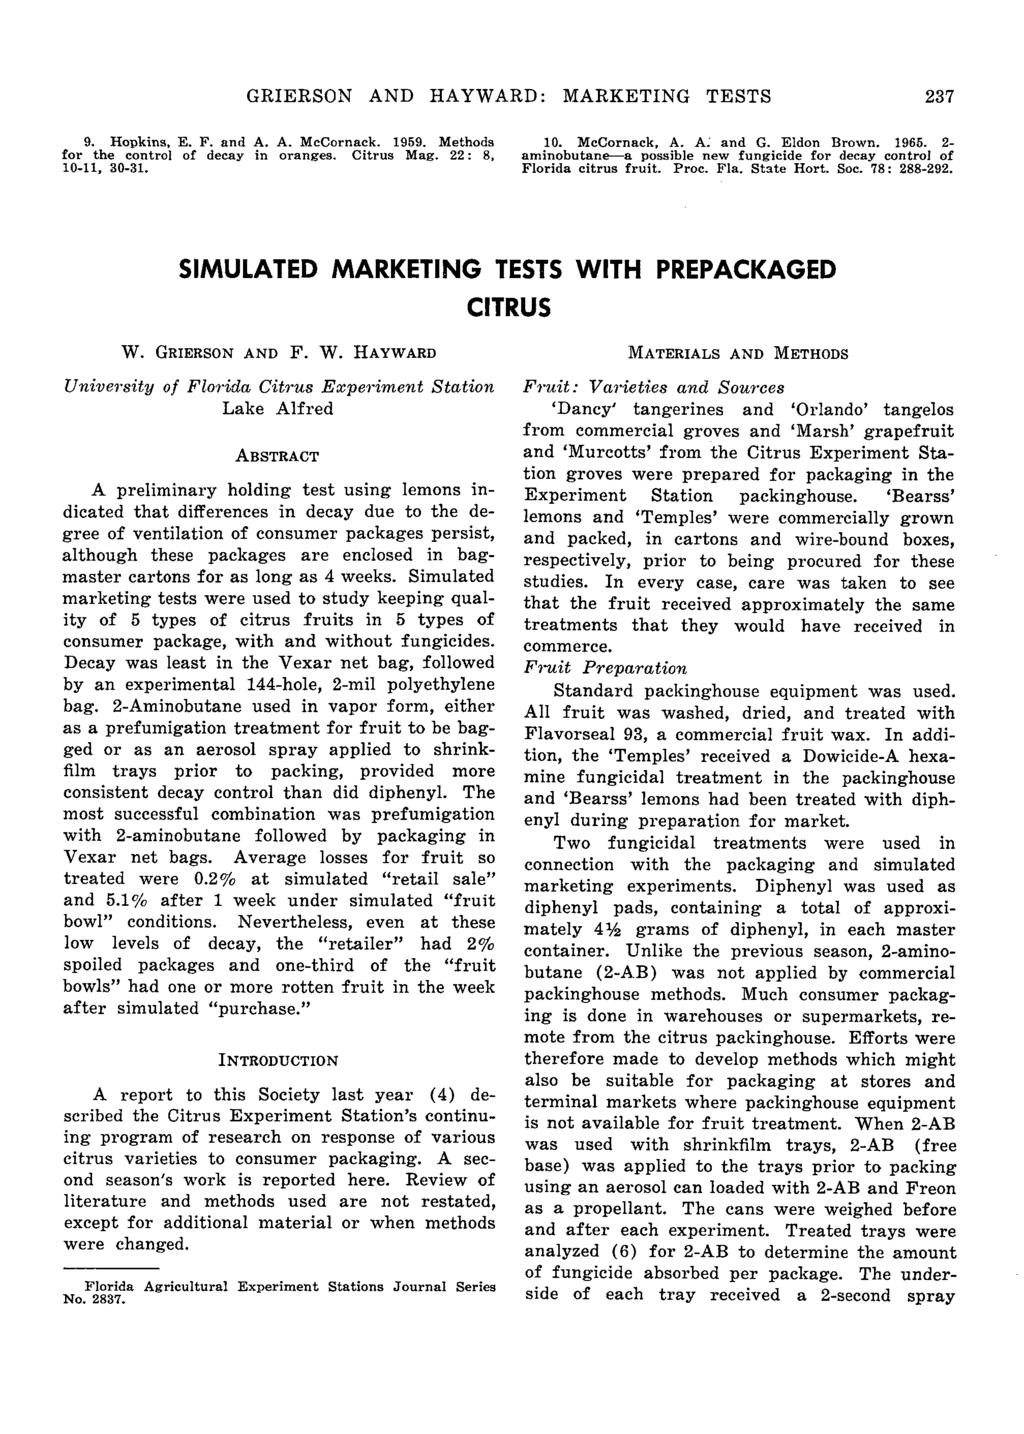 GRIERSON AND HAYWARD: MARKETING TESTS 237 9. Hopkins, E. F. and A. A. McCornack. 1959. Methods for the control of decay in oranges. Citrus Mag. 22: 8, 10-11, 30-31. 10. McCornack, A. A. and G.